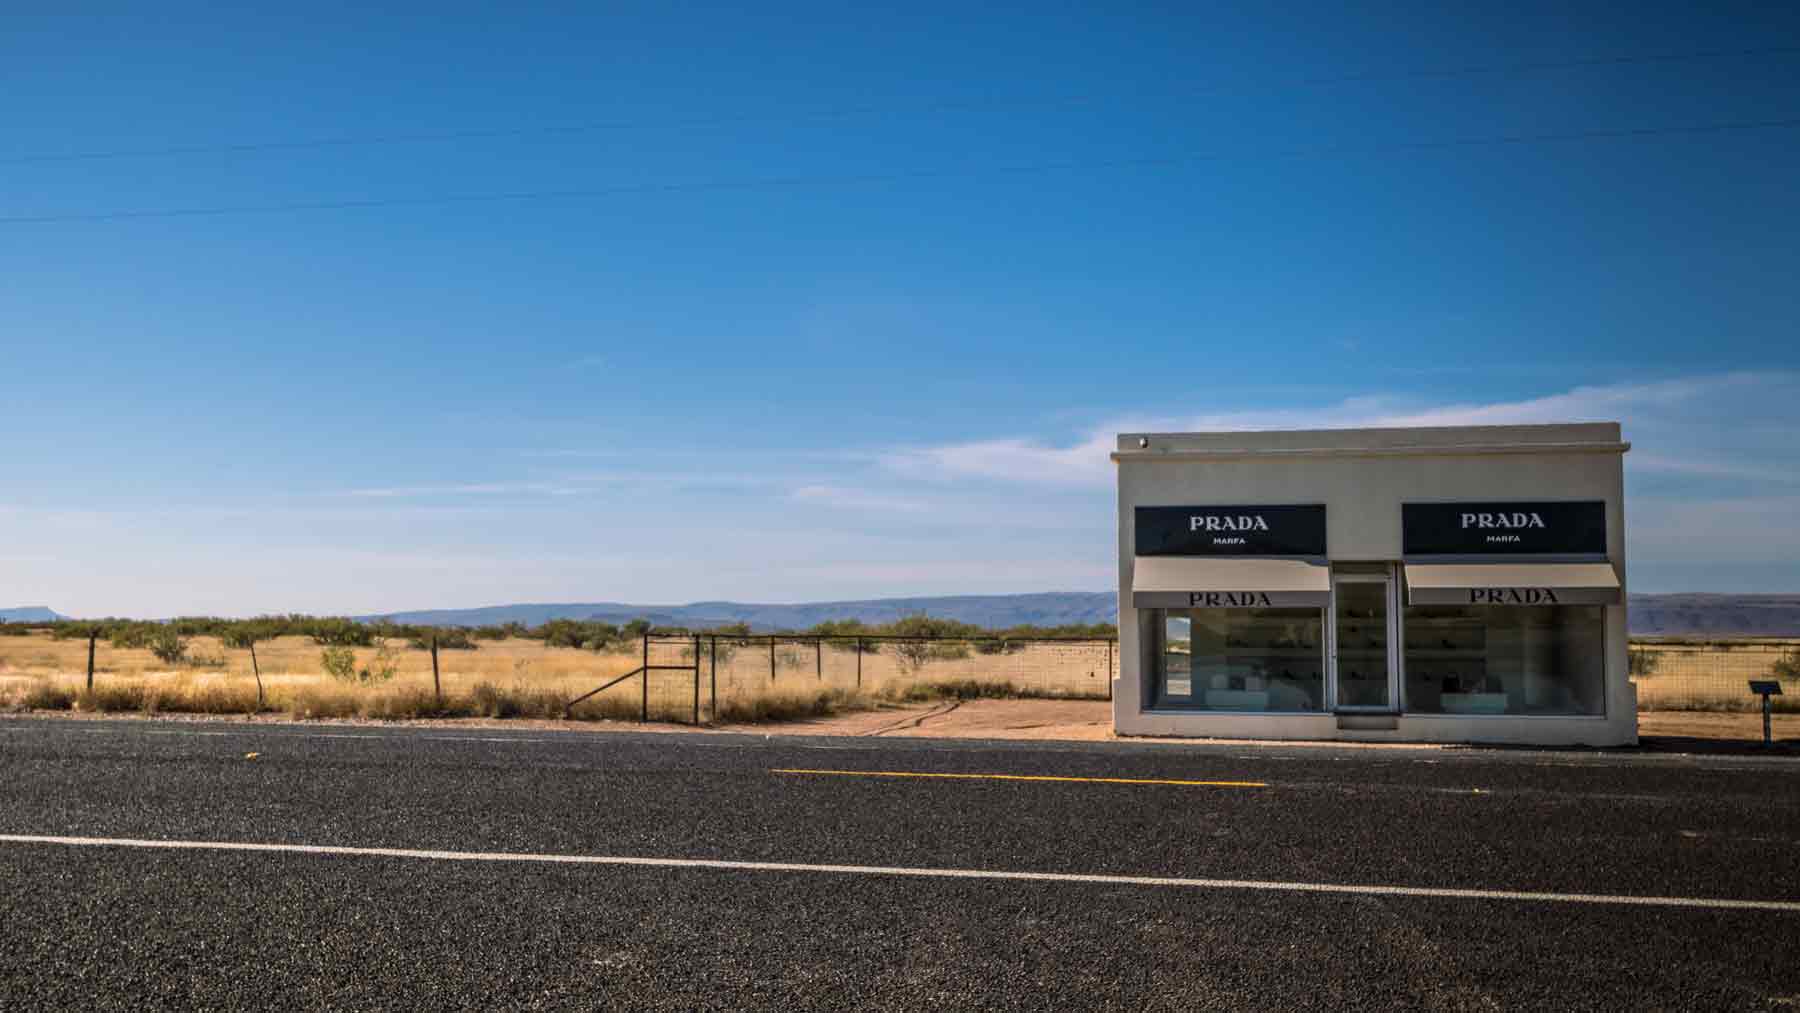 Prada Marfa art installation with road in foreground and bright blue sky in the background